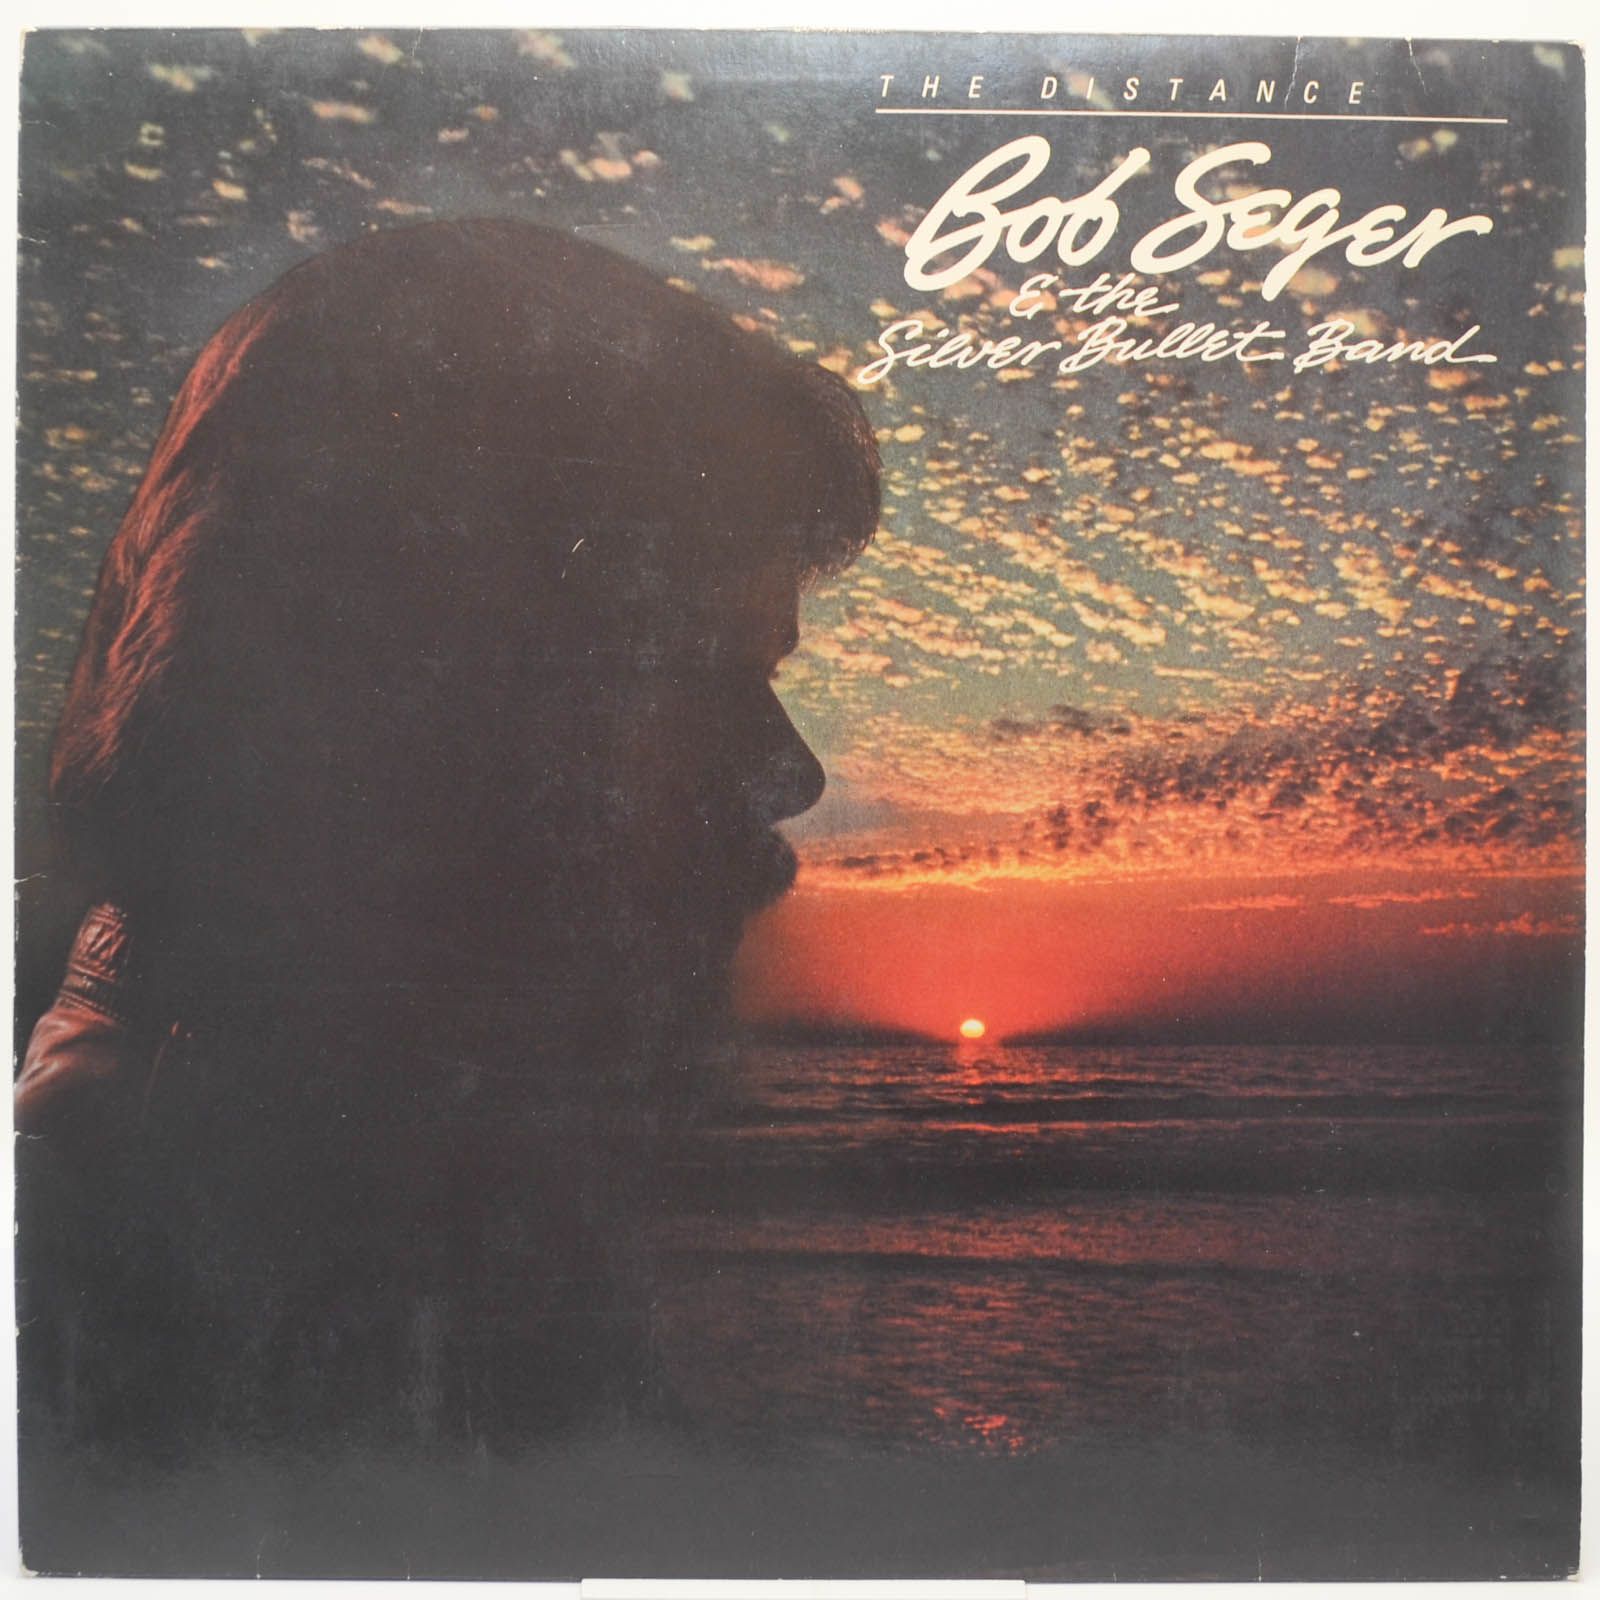 Bob Seger And The Silver Bullet Band — The Distance, 1982